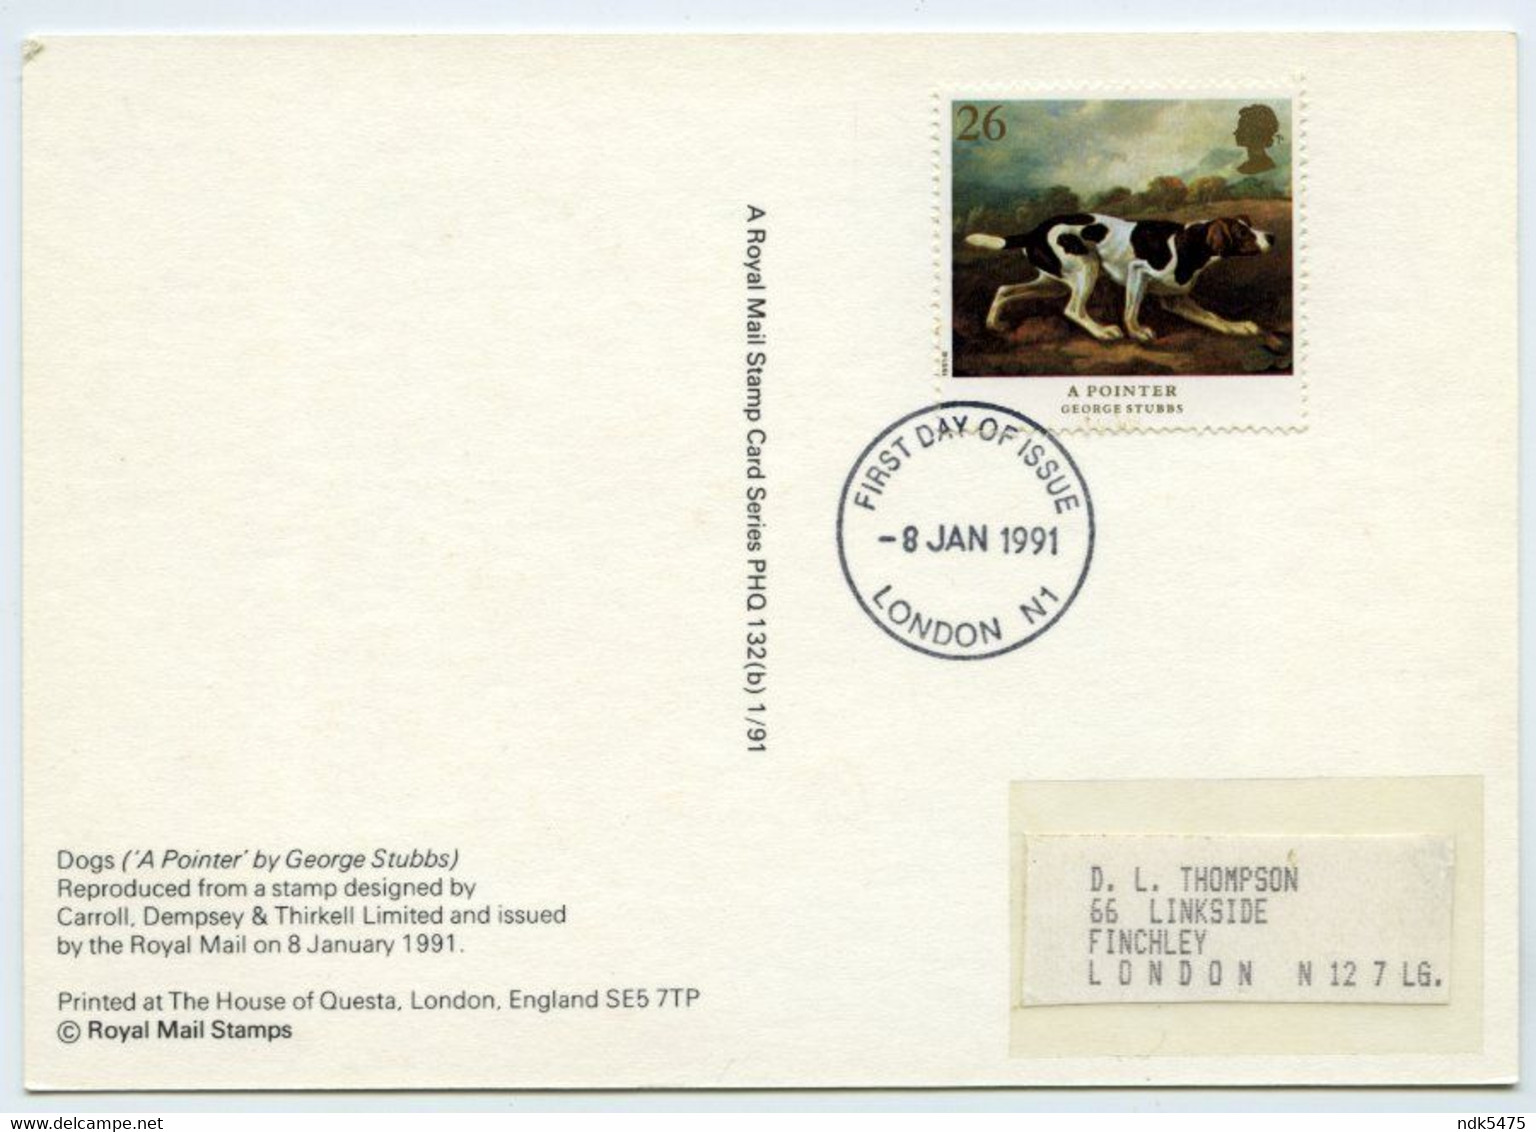 PHQ : GEORGE STUBBS - DOGS, A POINTER, 1991 : FIRST DAY OF ISSUE, LONDON N1, FINCHLEY (10 X 15cms Approx.) - PHQ Karten